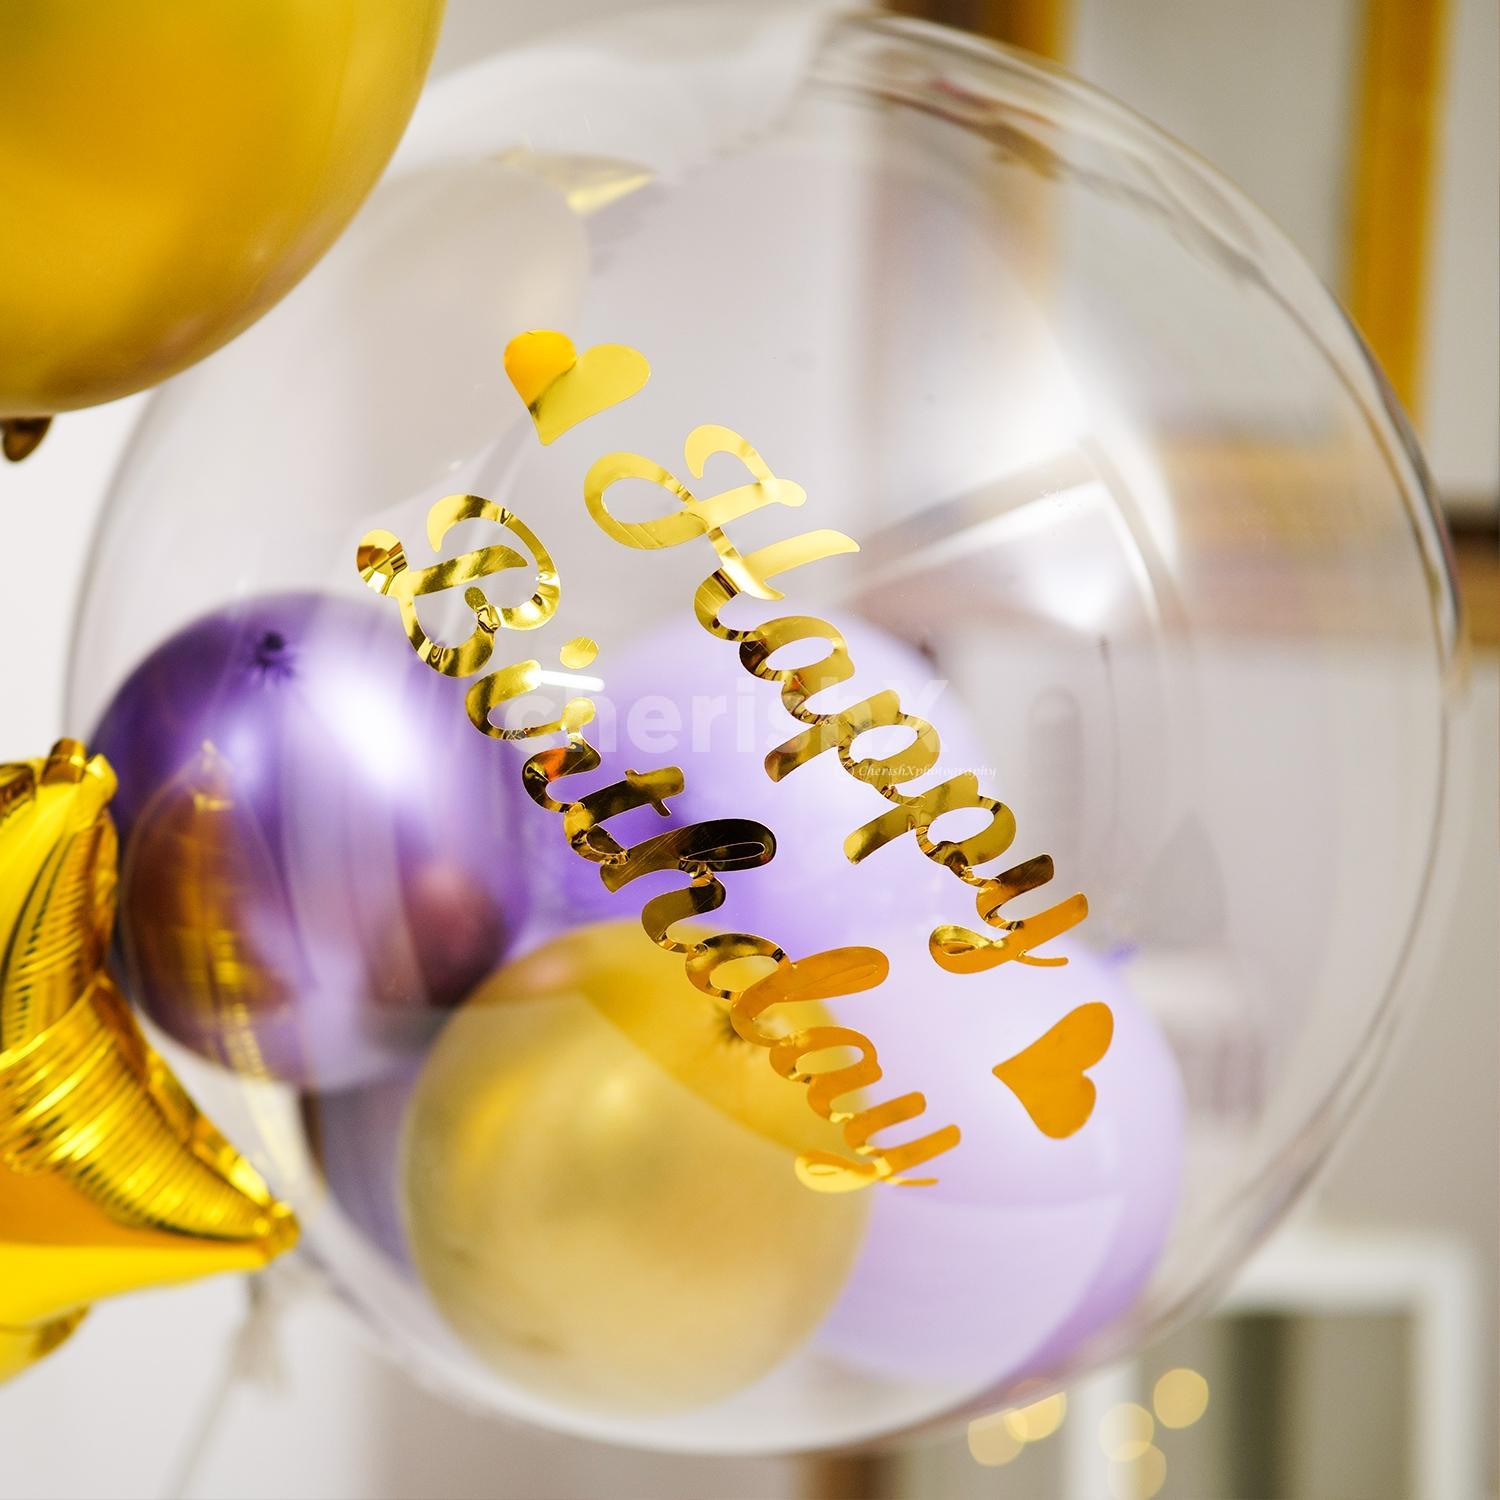 Celebrate a royal birthday with the royal colors, purple and gold!